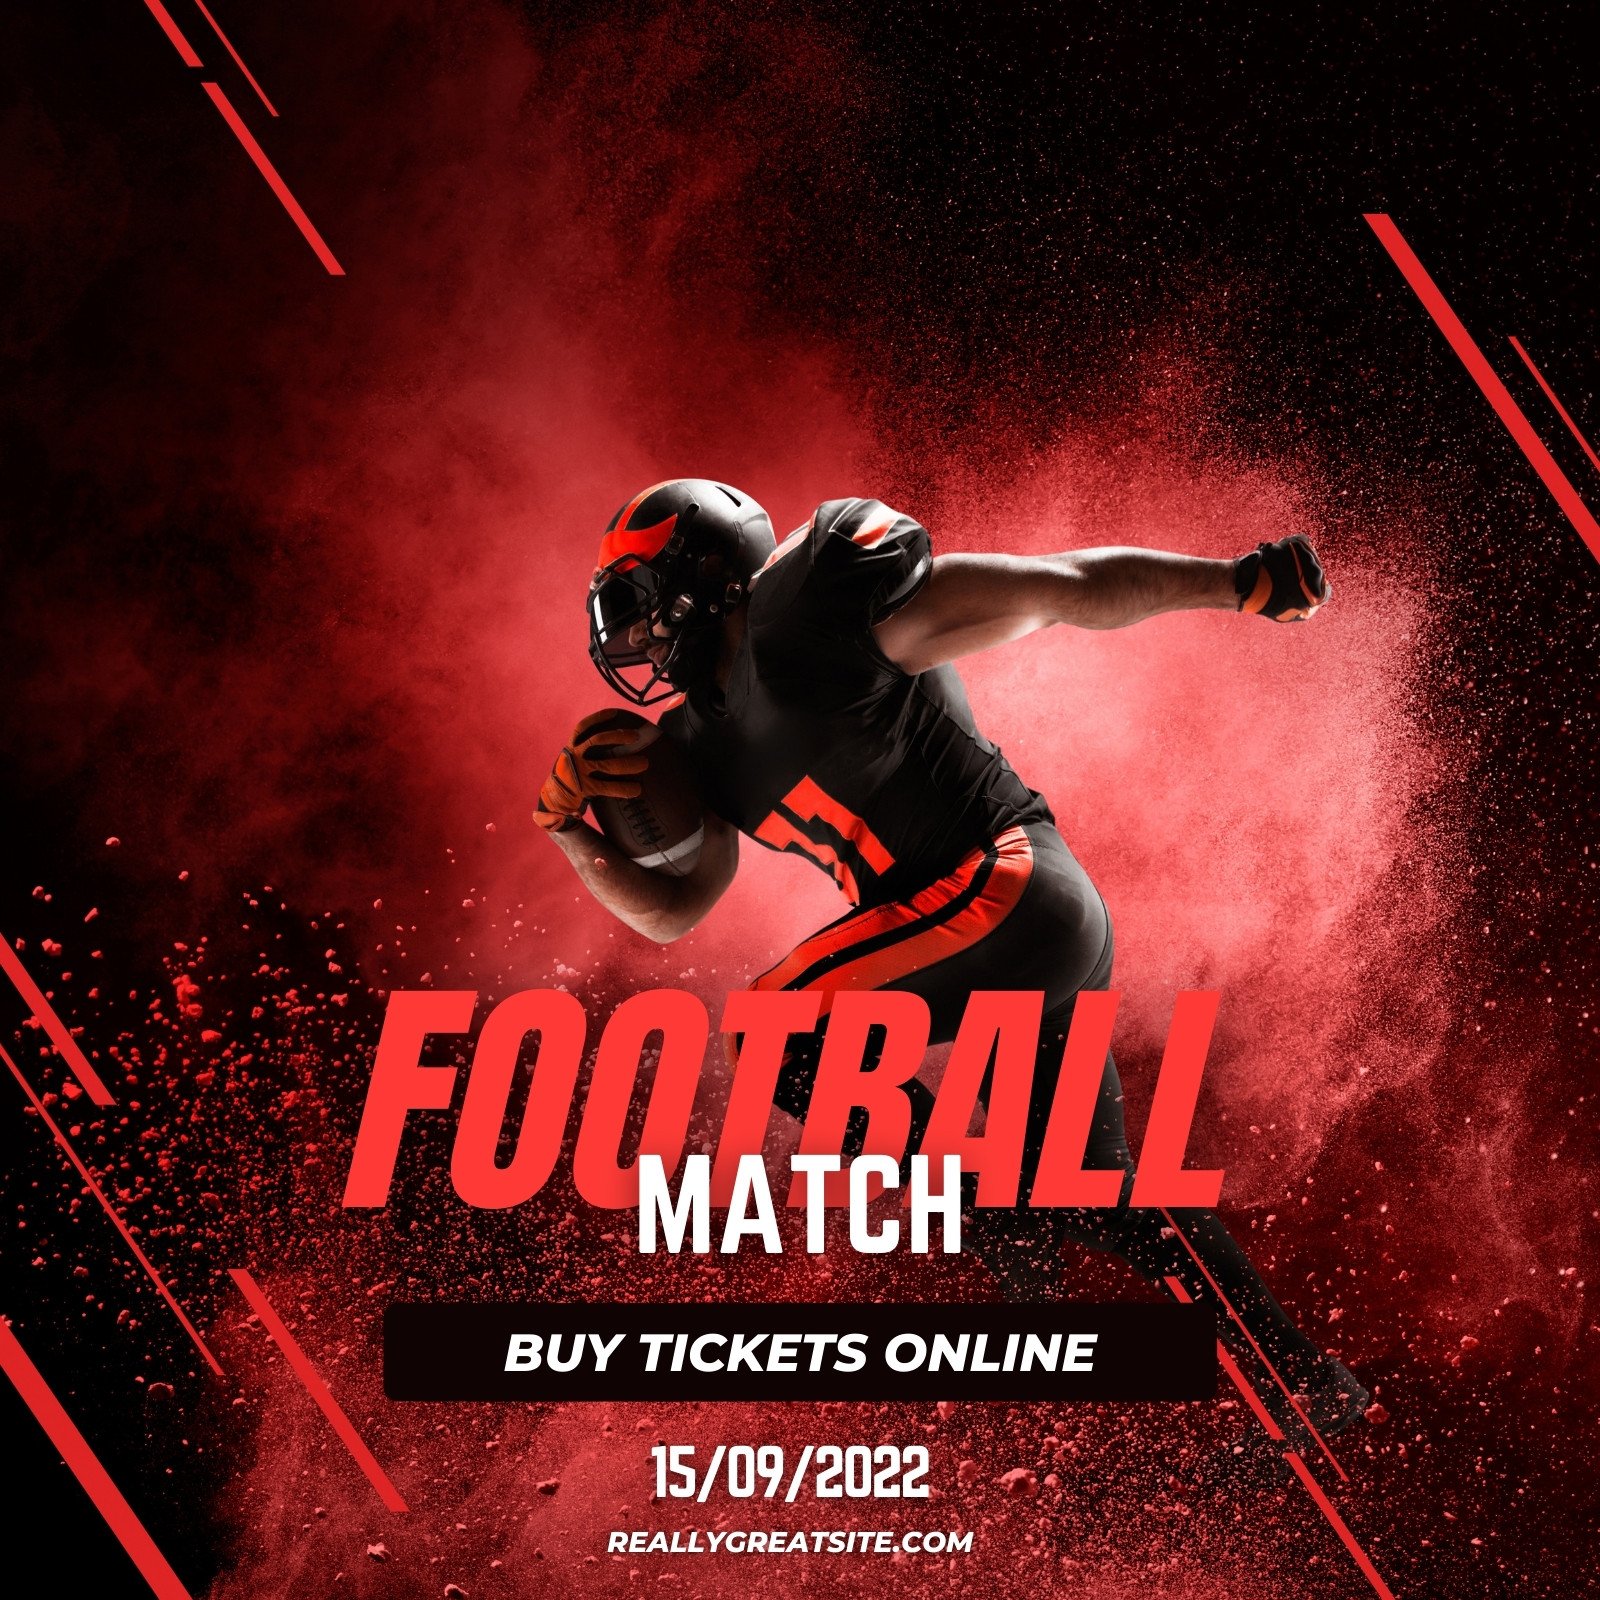 Red Dynamic Football Match Announce Instagram post